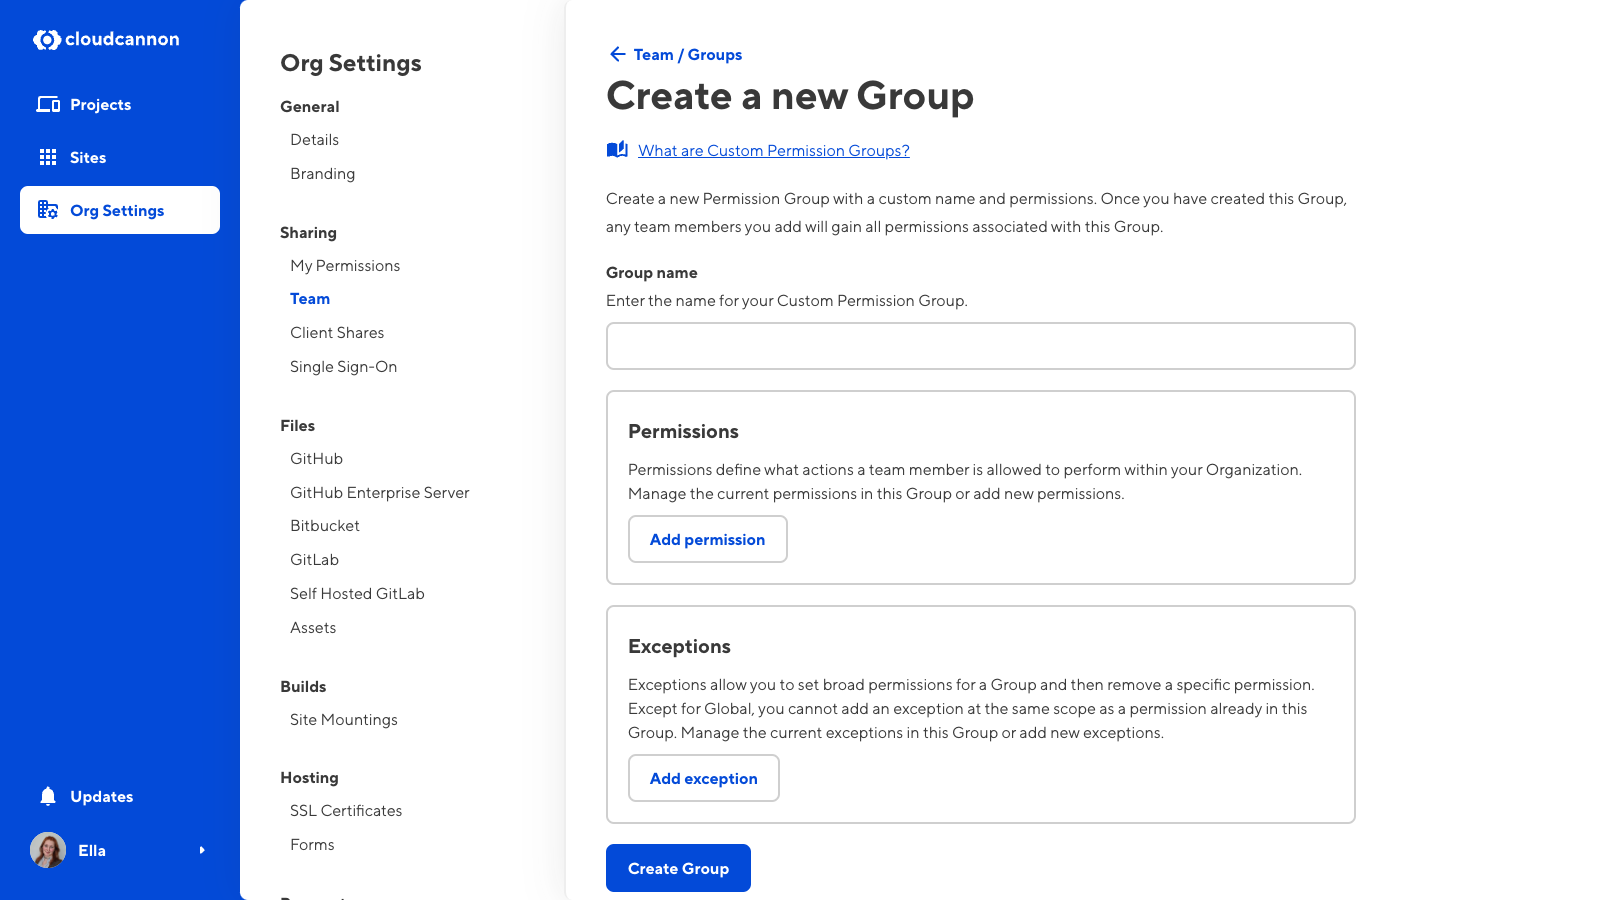 A screenshot of the Create A New Group page shows the options to add a name, permissions, and exceptions to a Custom Permission Group.